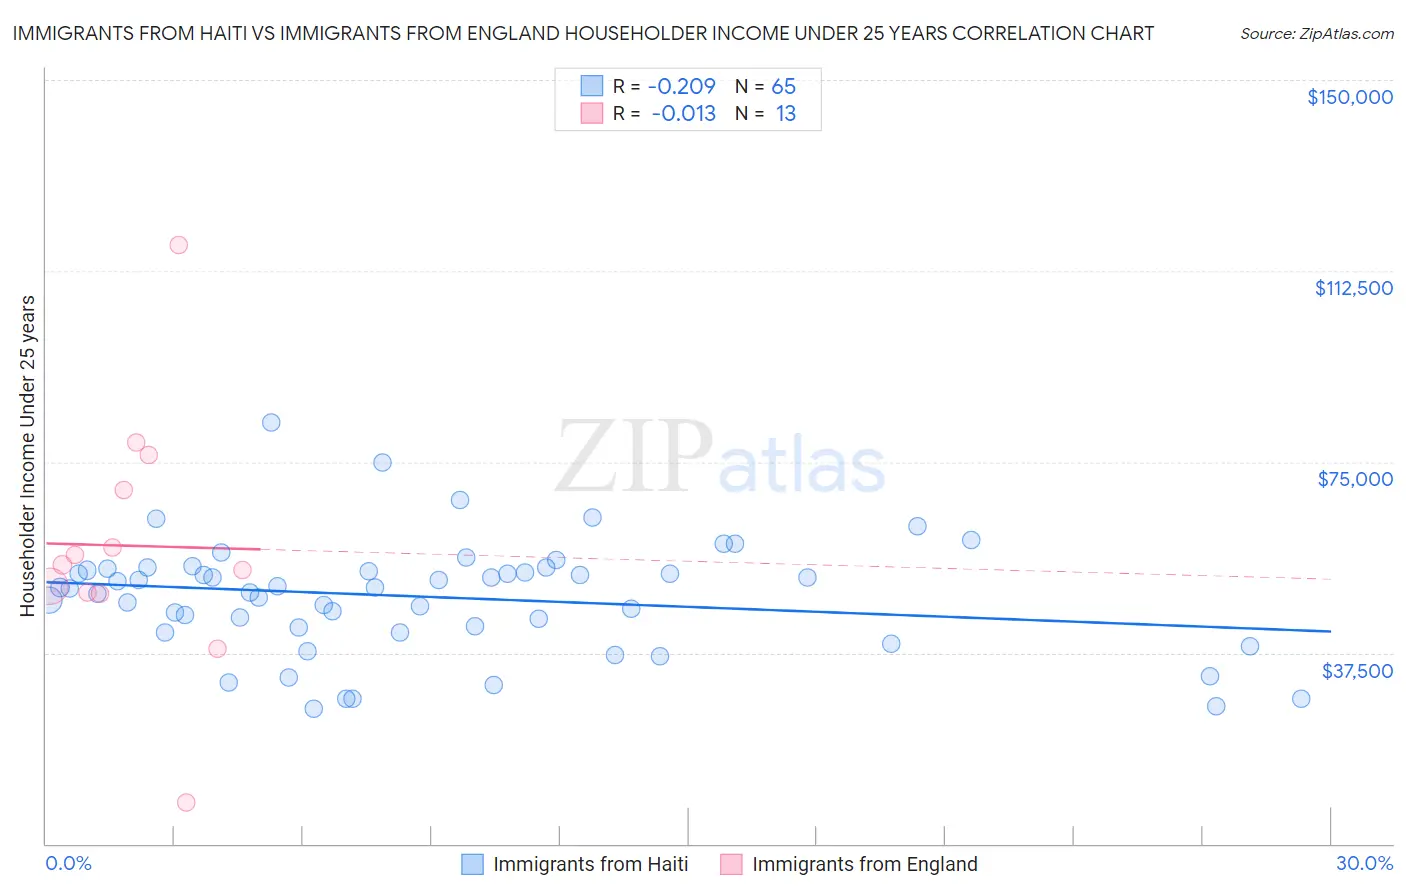 Immigrants from Haiti vs Immigrants from England Householder Income Under 25 years